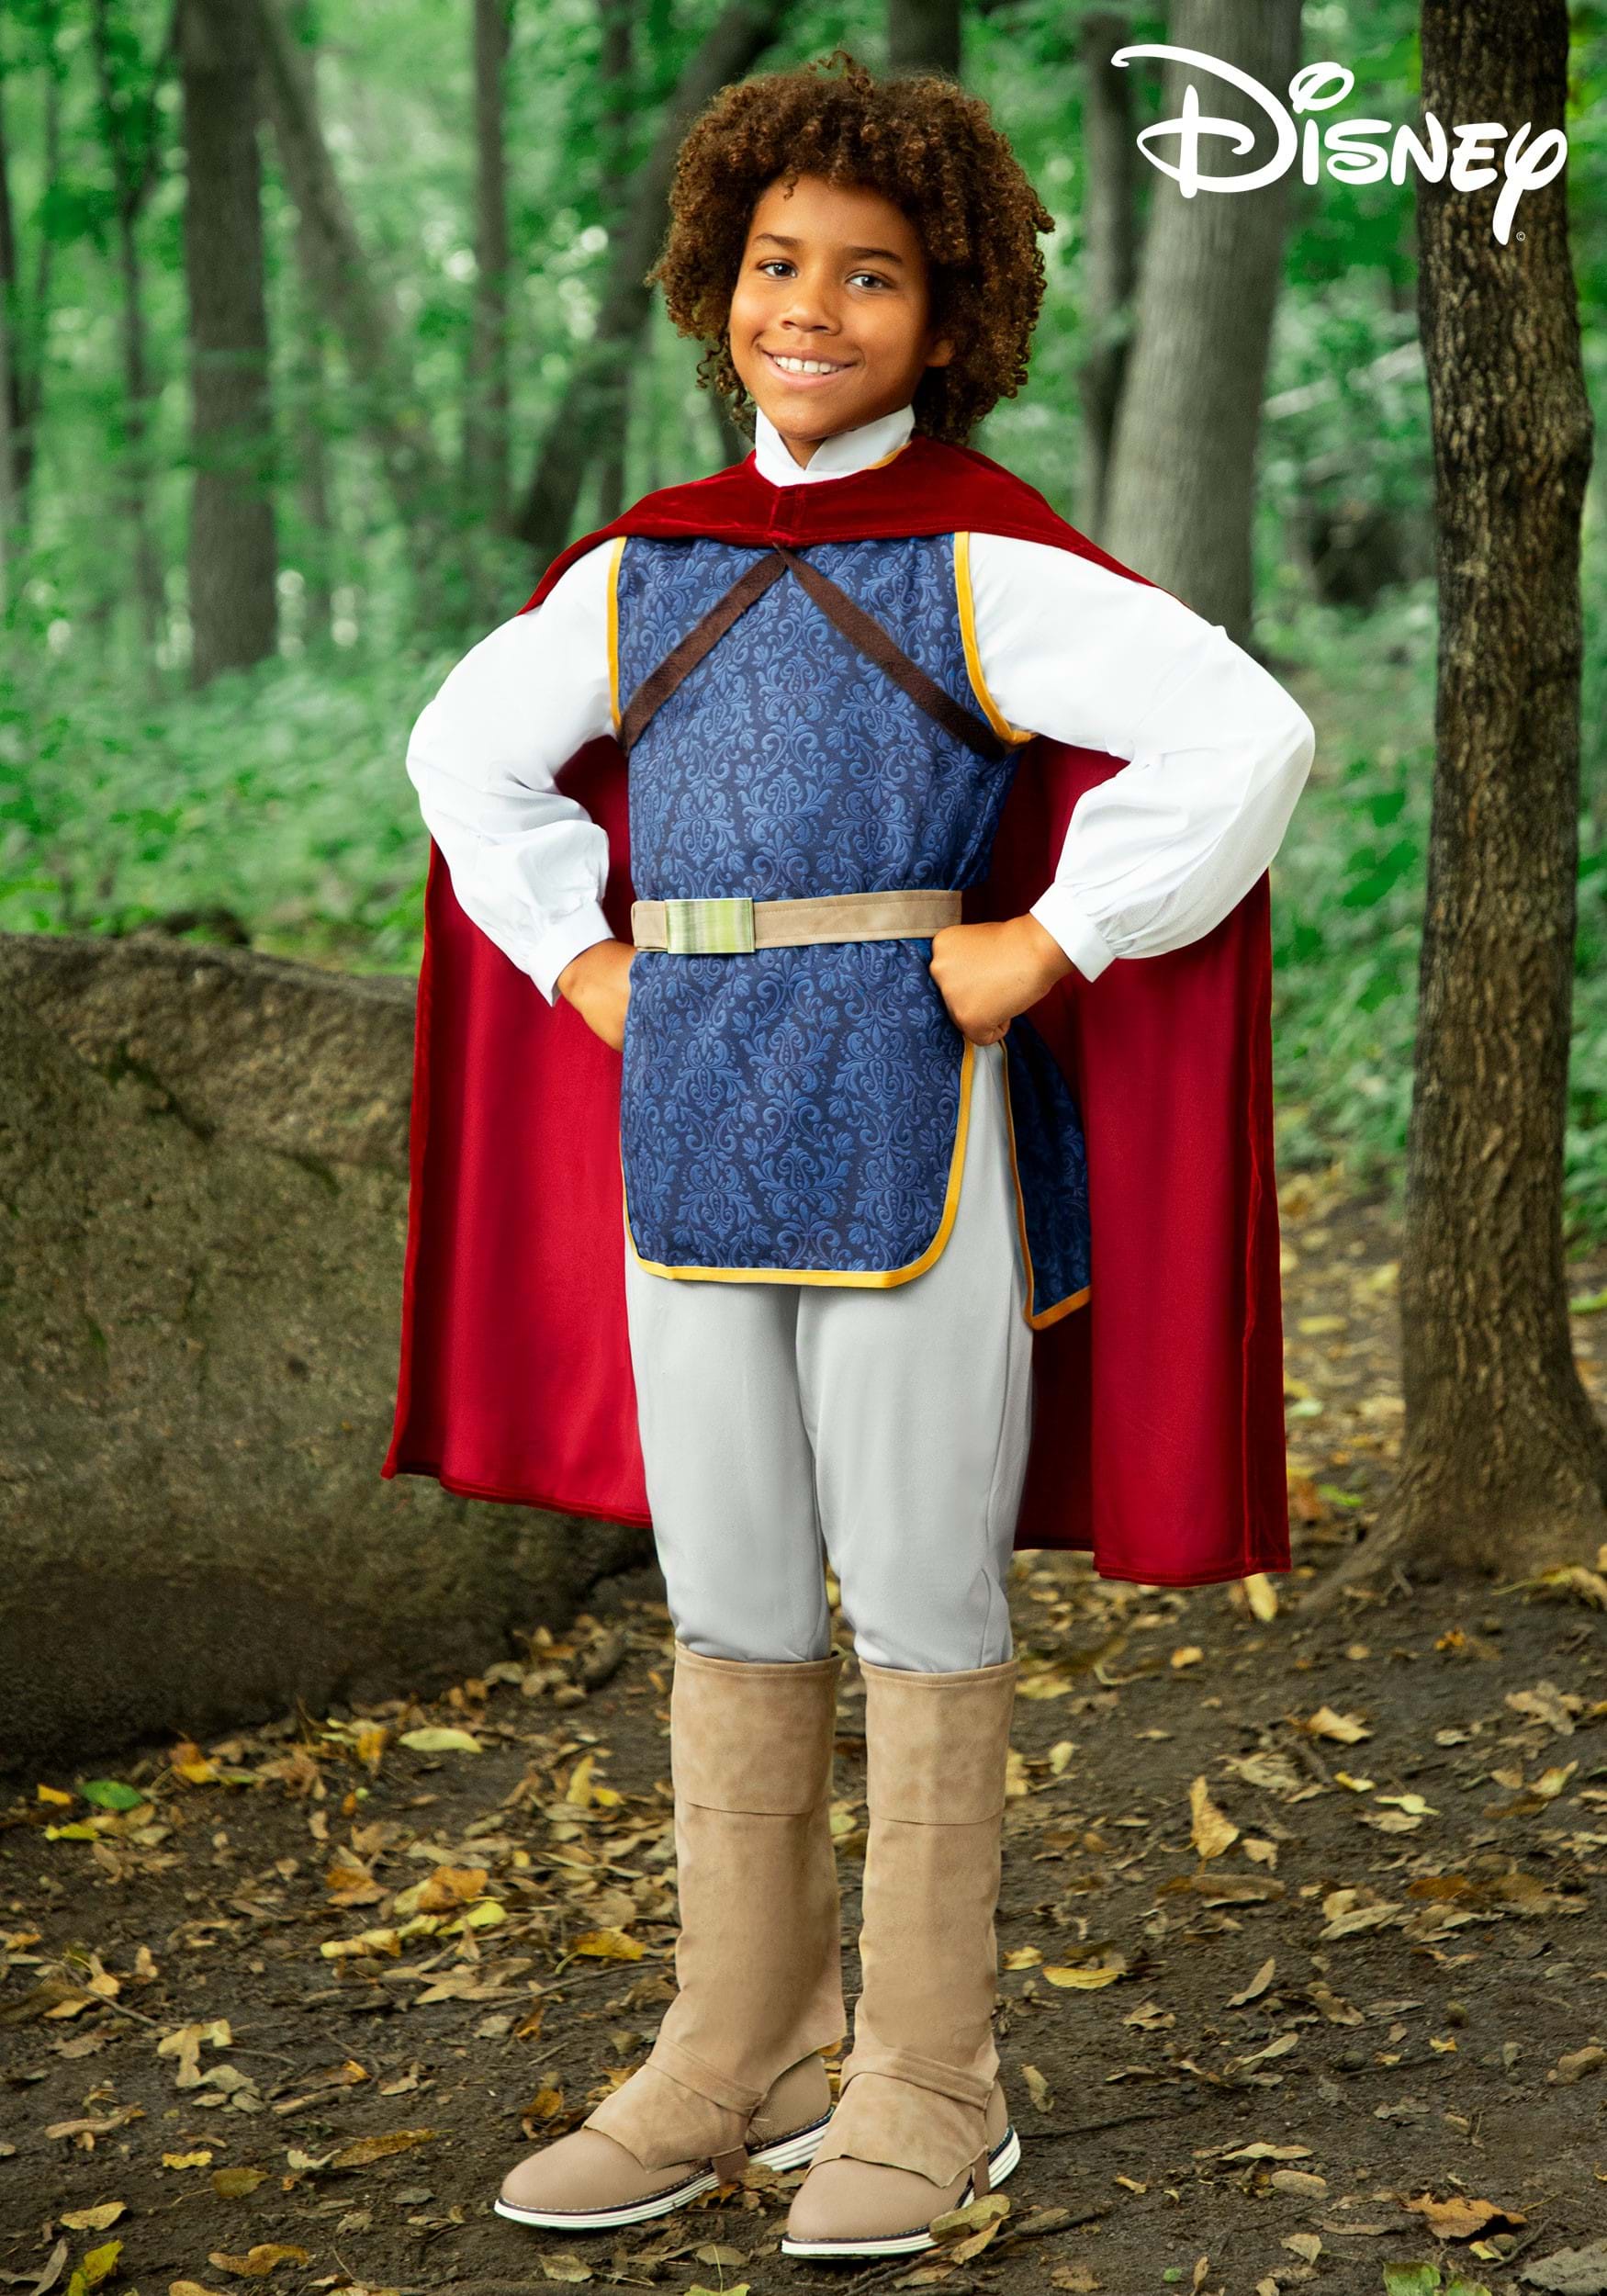 https://images.halloweencostumes.com/products/68827/1-1/snow-white-prince-kids-costume-1.jpg